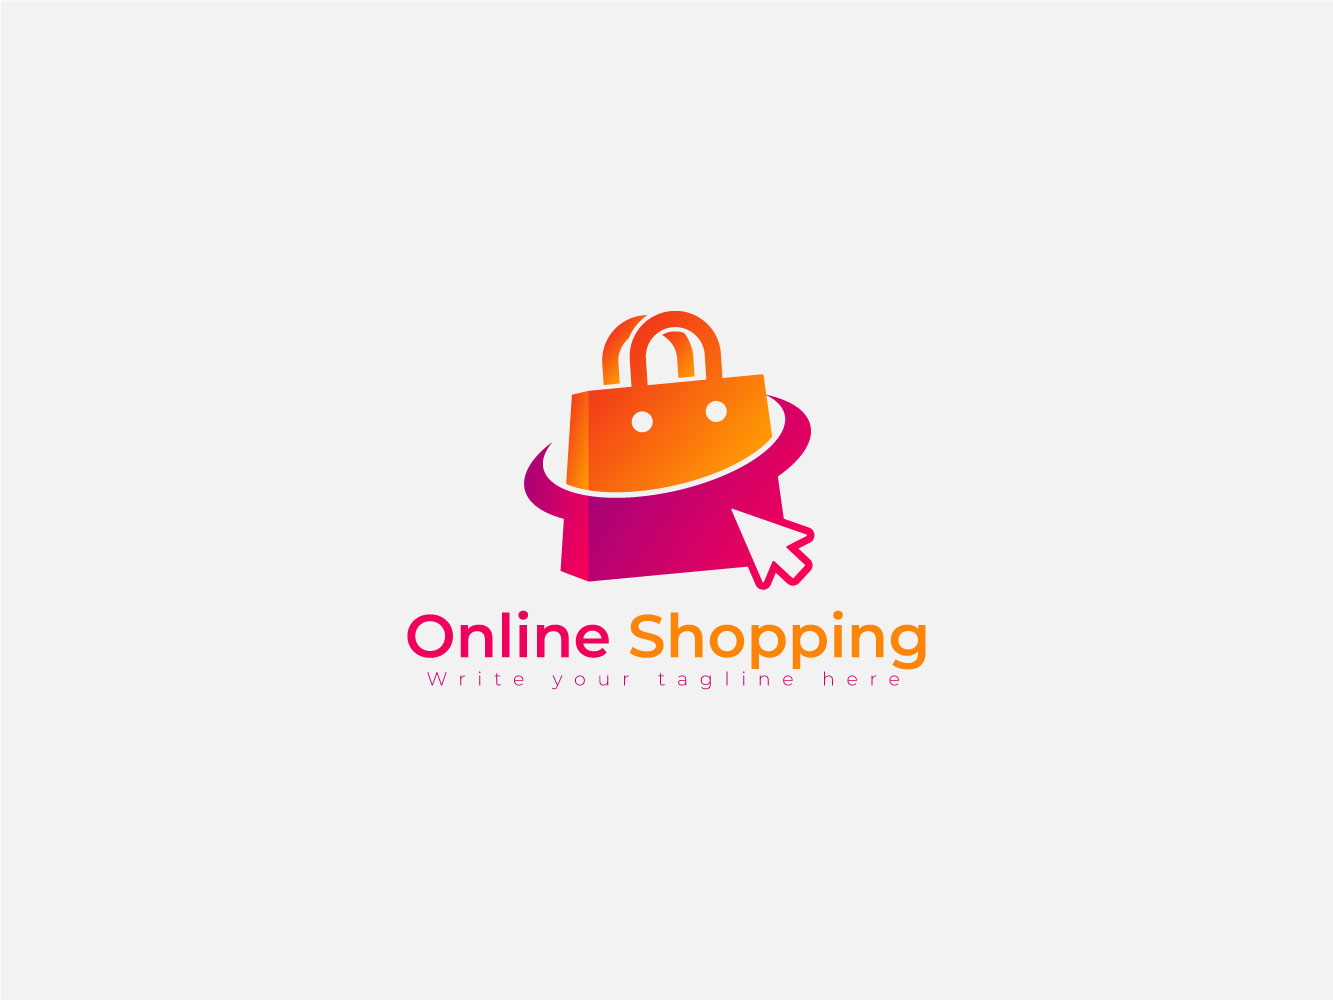 Online Shopping Logo With Shopping Bag And Mouse Pointer